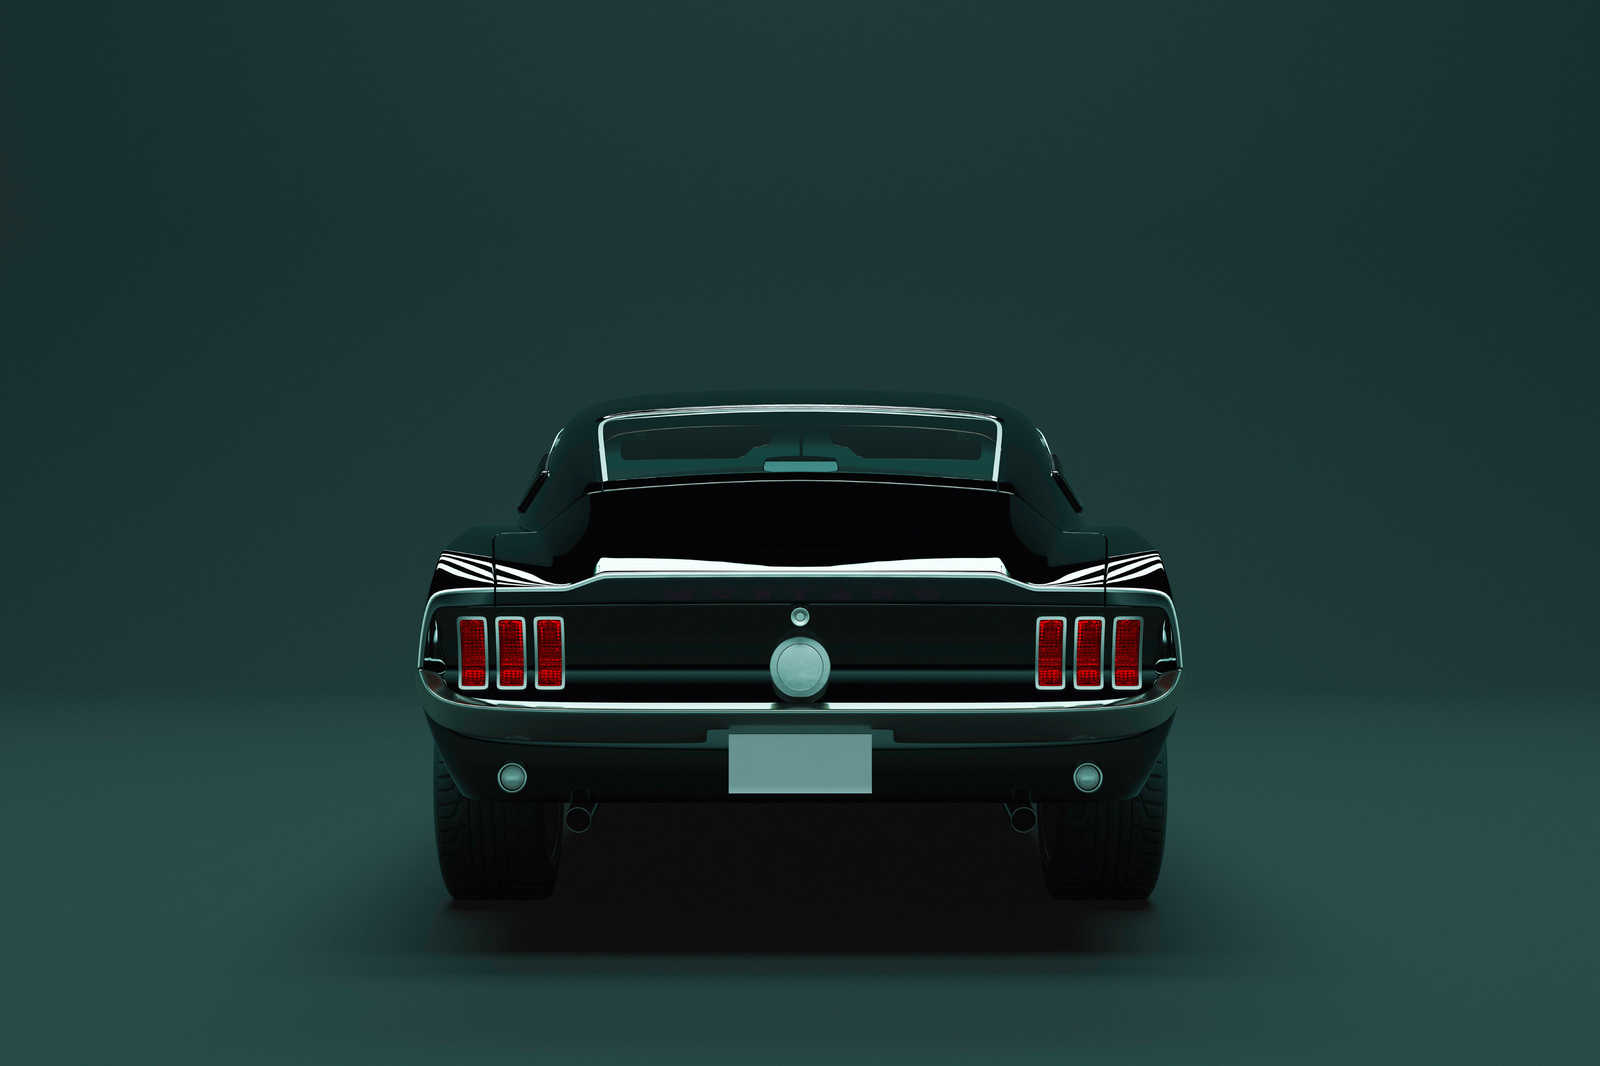             Mustang 3 - American Muscle Car toile - 0,90 m x 0,60 m
        